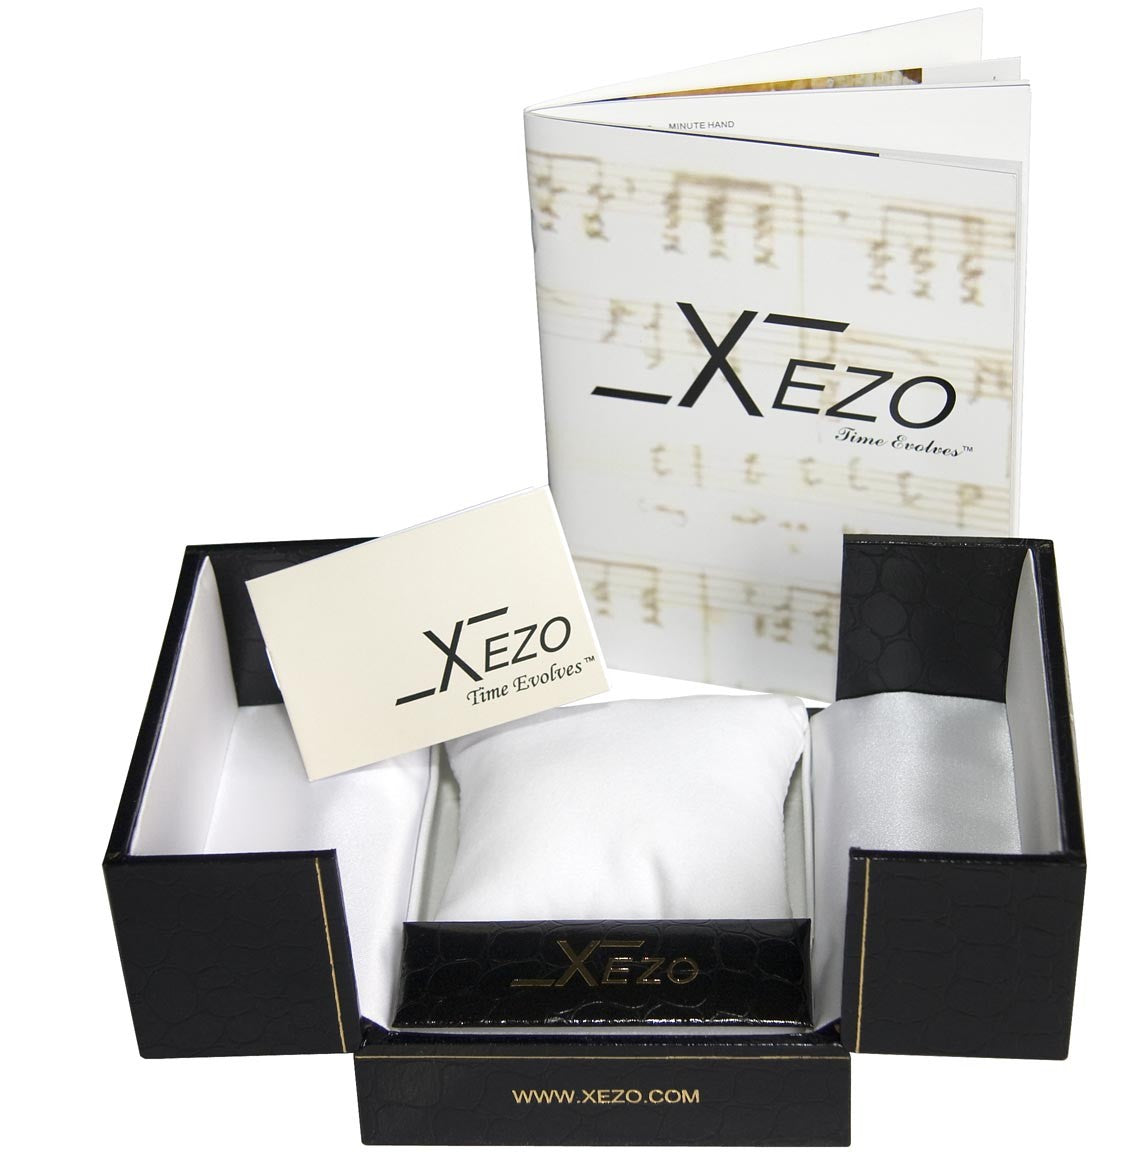 Xezo - Black gift box, certificate, and manual of the Air Commando D45-BL watch